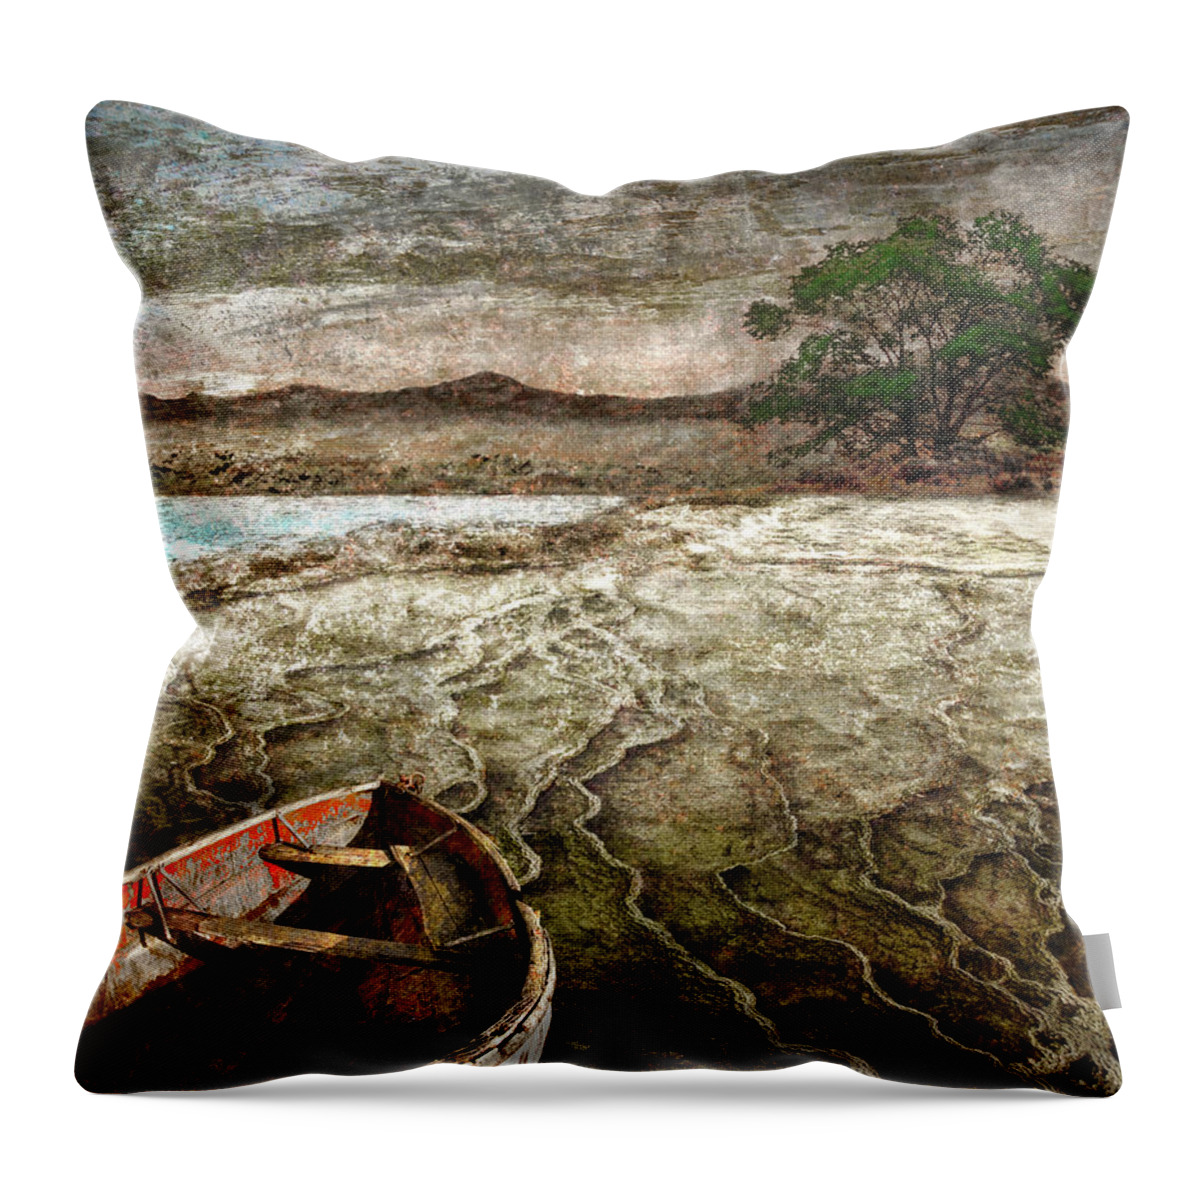 Boat Throw Pillow featuring the digital art Red Boat by Ken Taylor